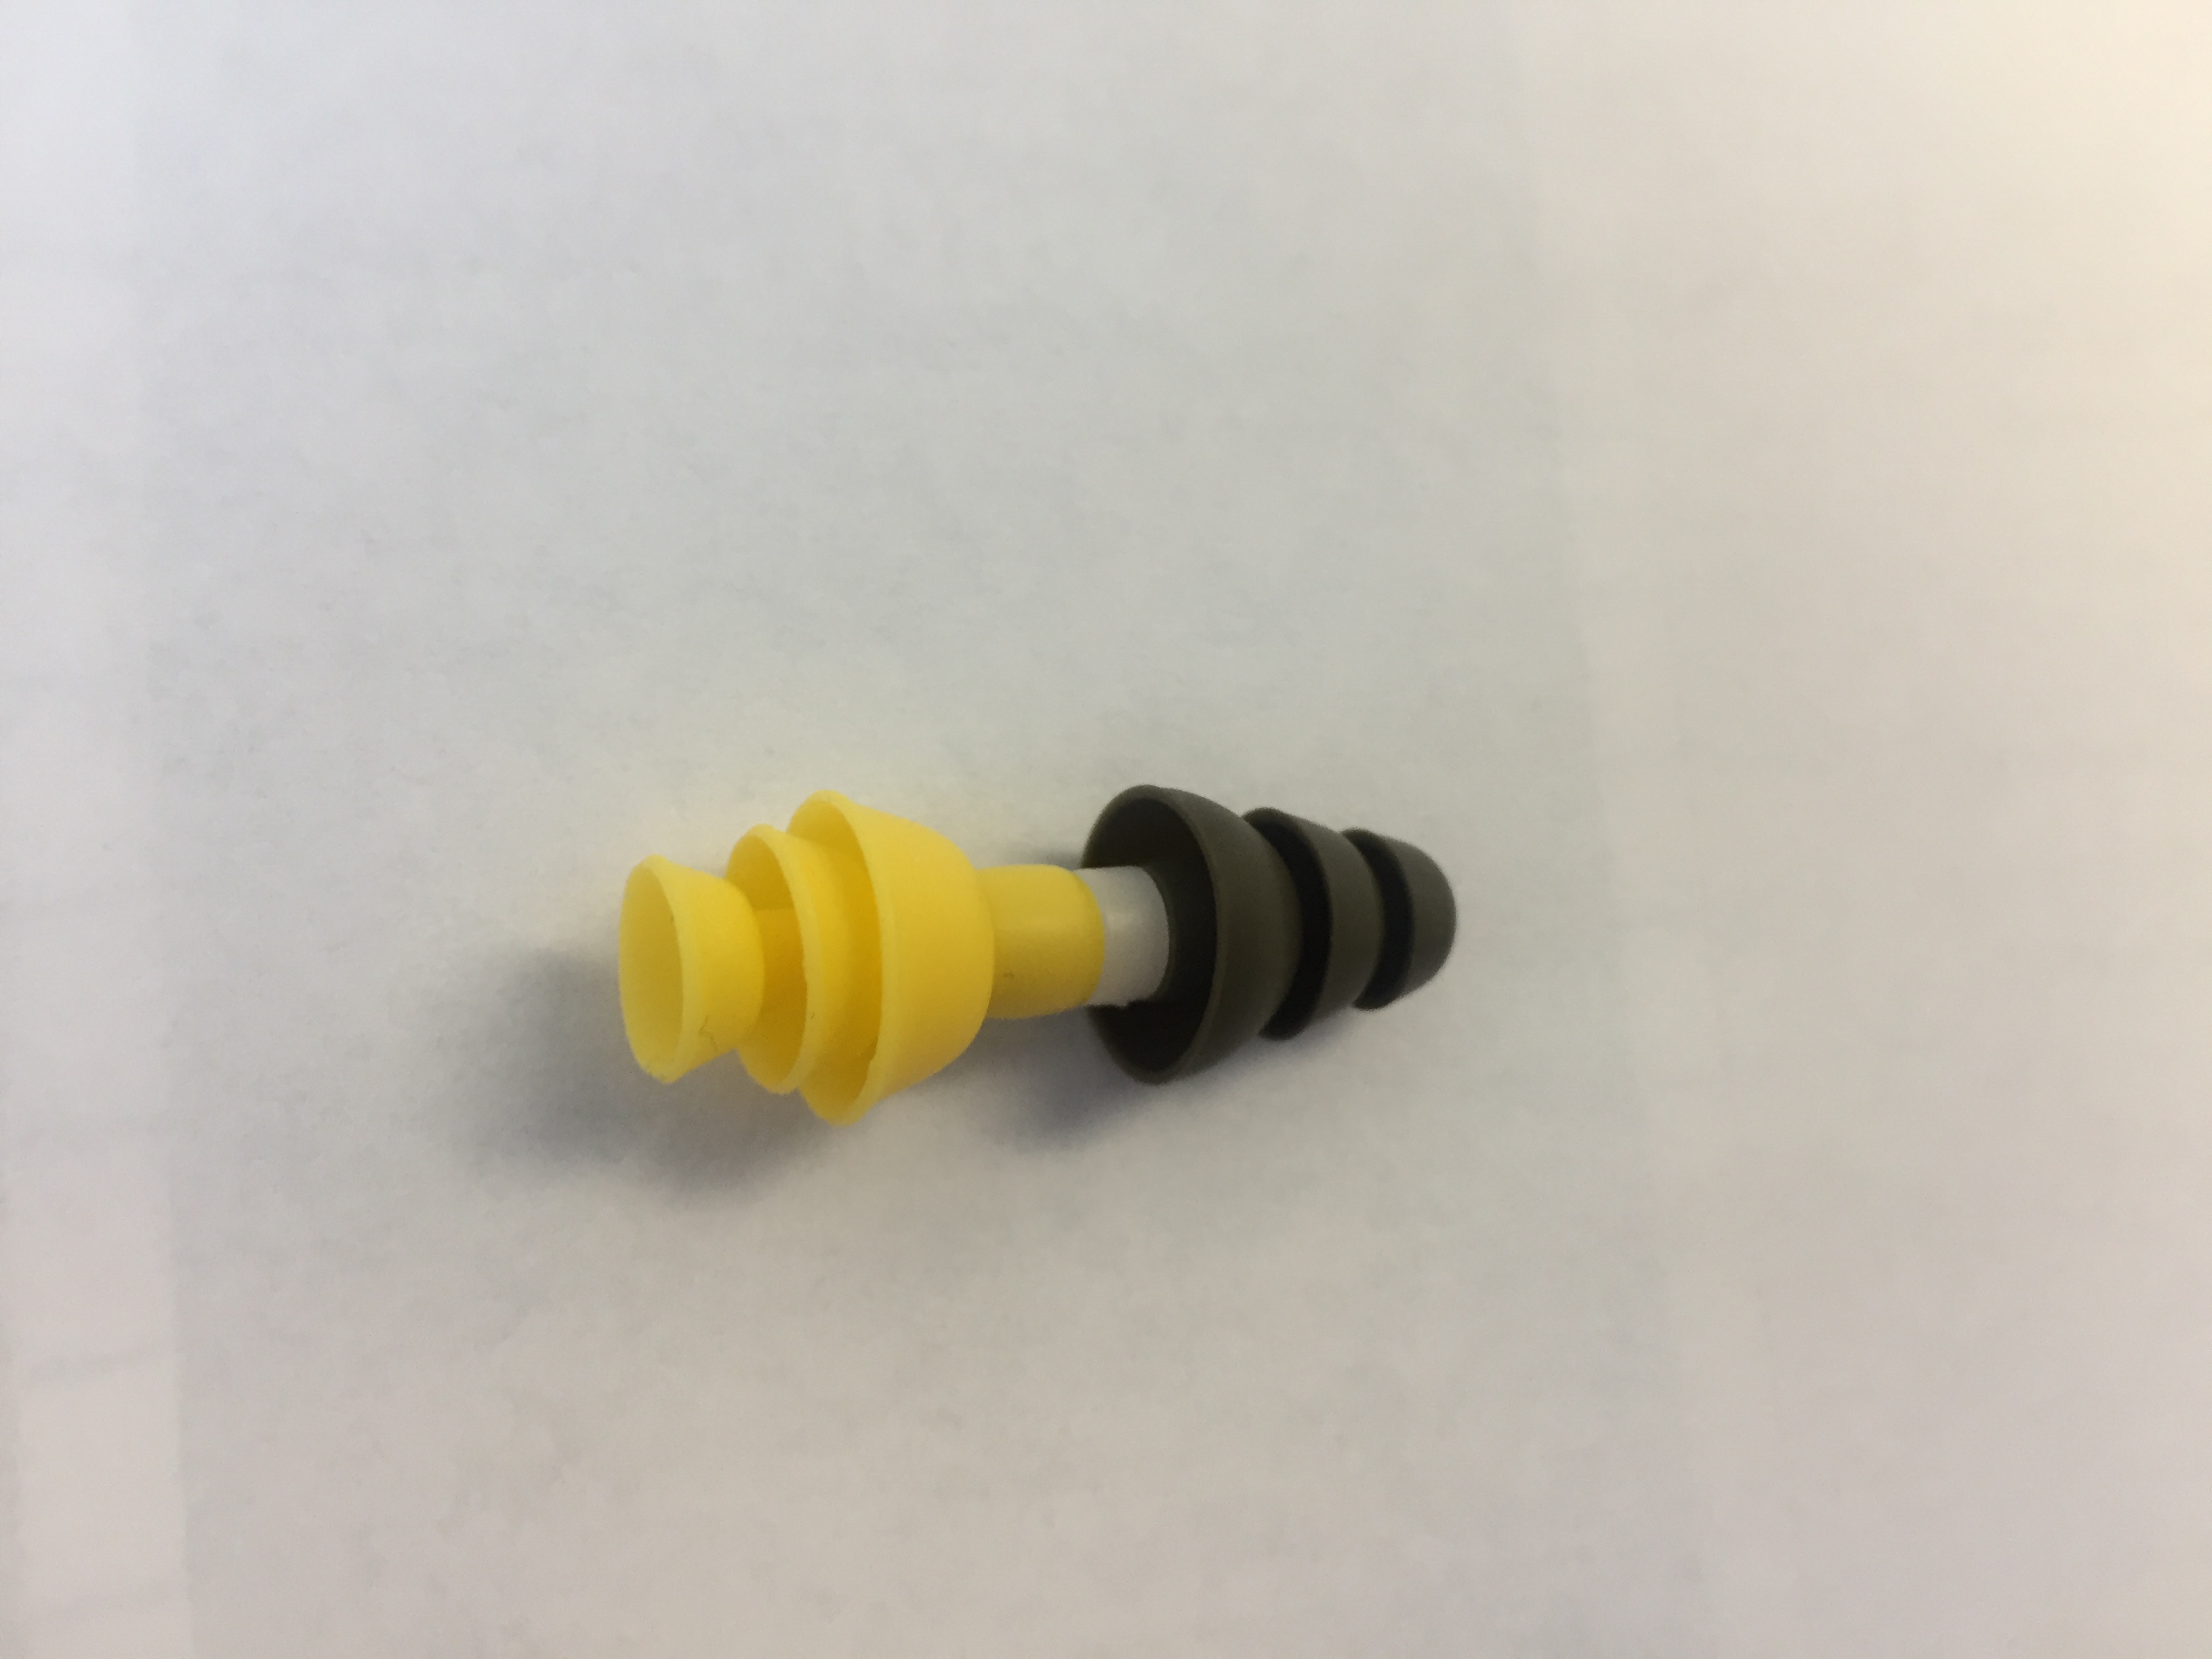 defective 3M military earplug with yellow flanges folded back